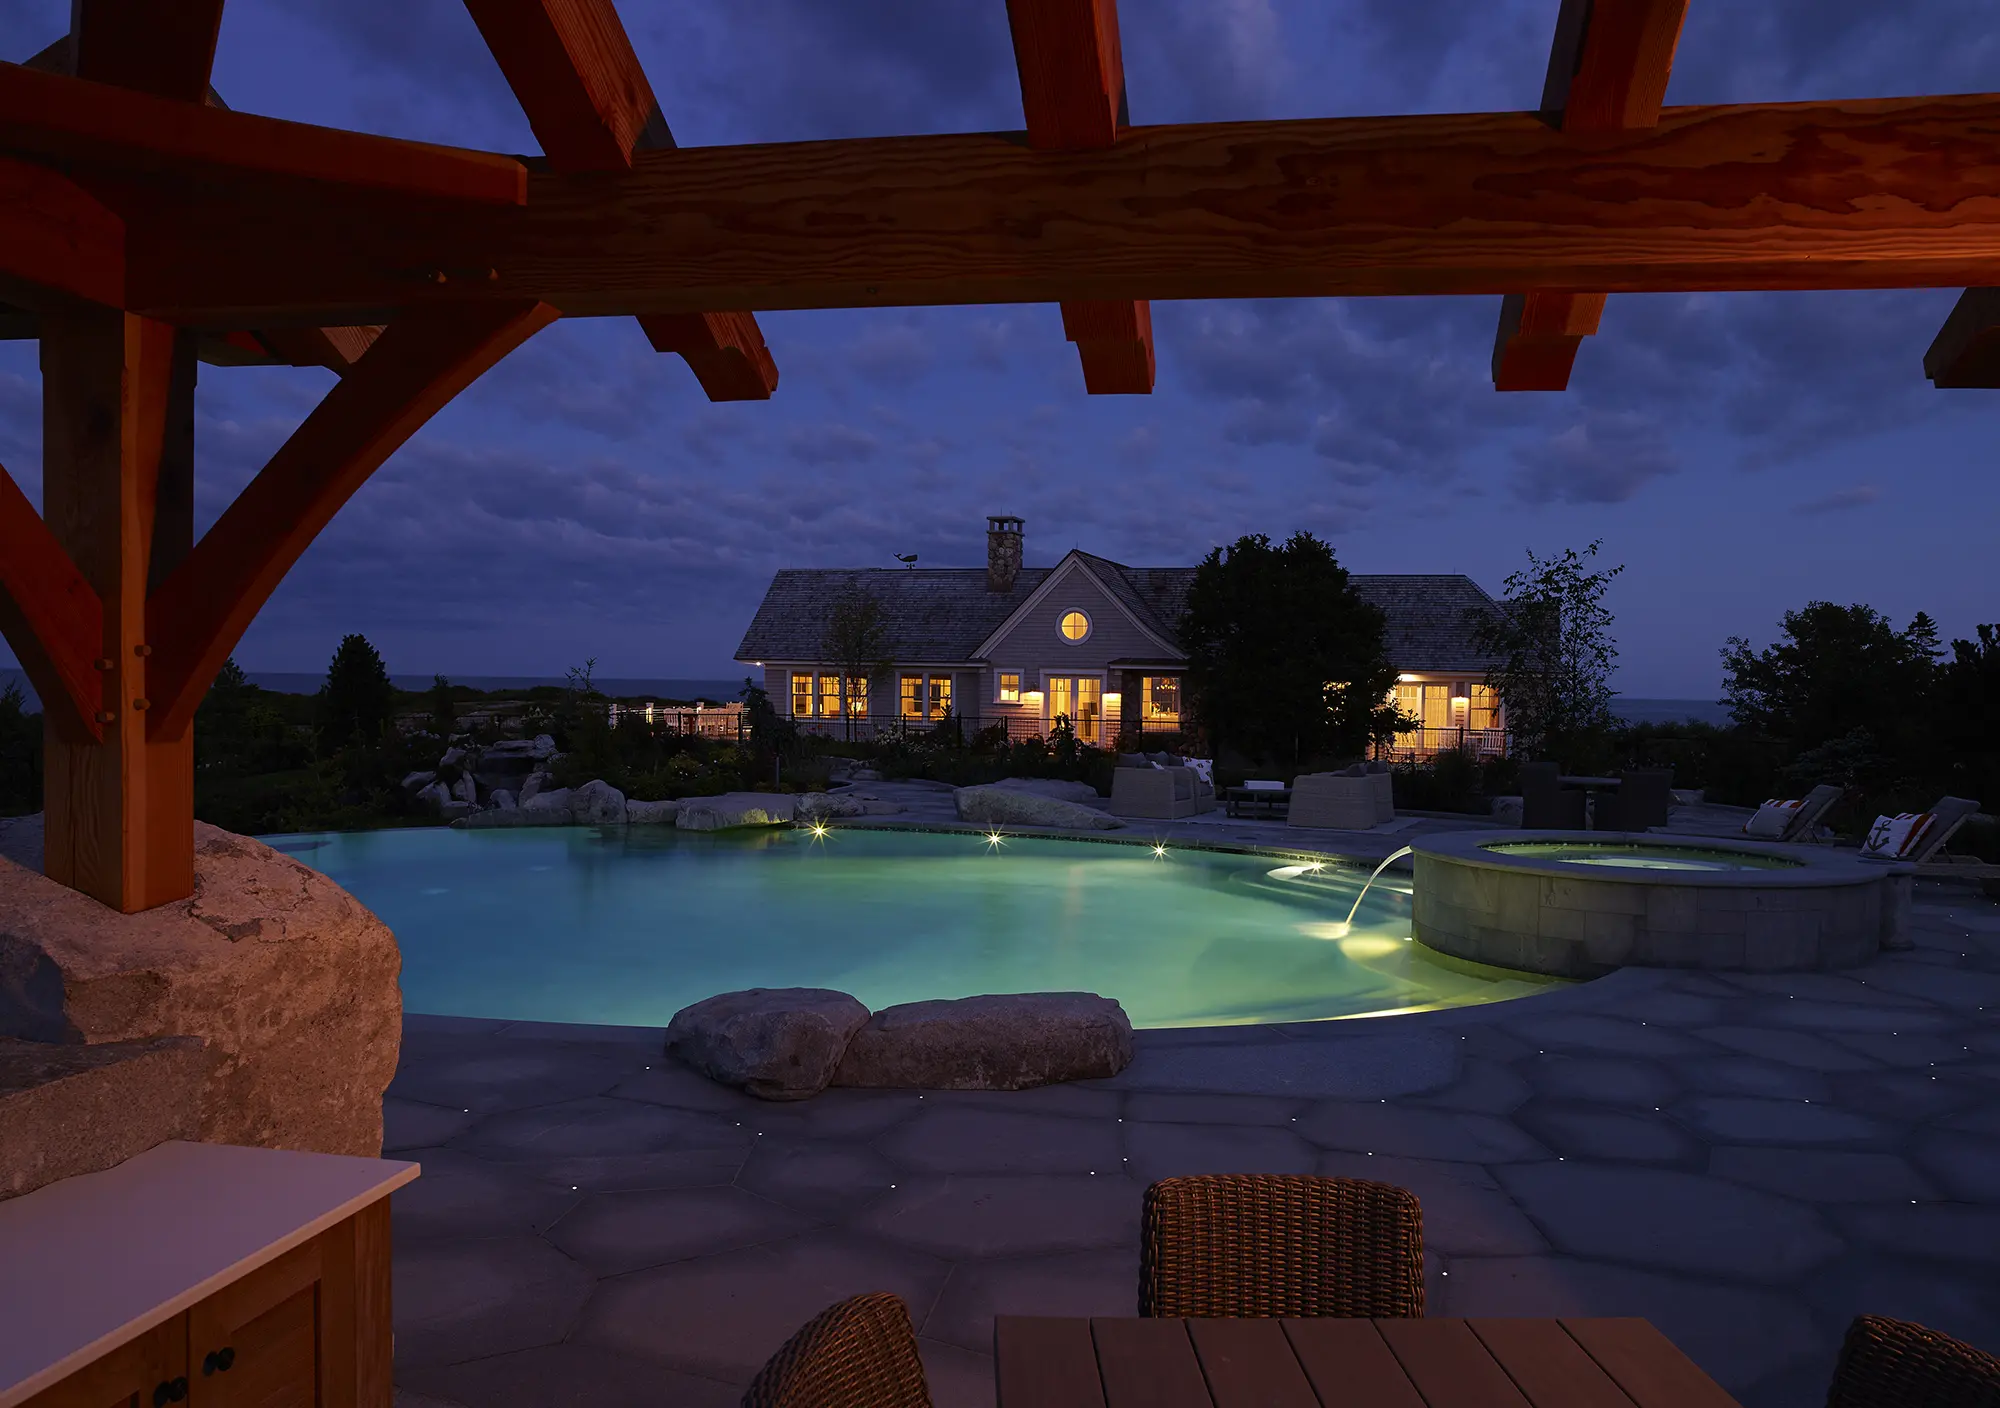 Evening view of Whales Watch and the inground hot tub and pool from the pergola